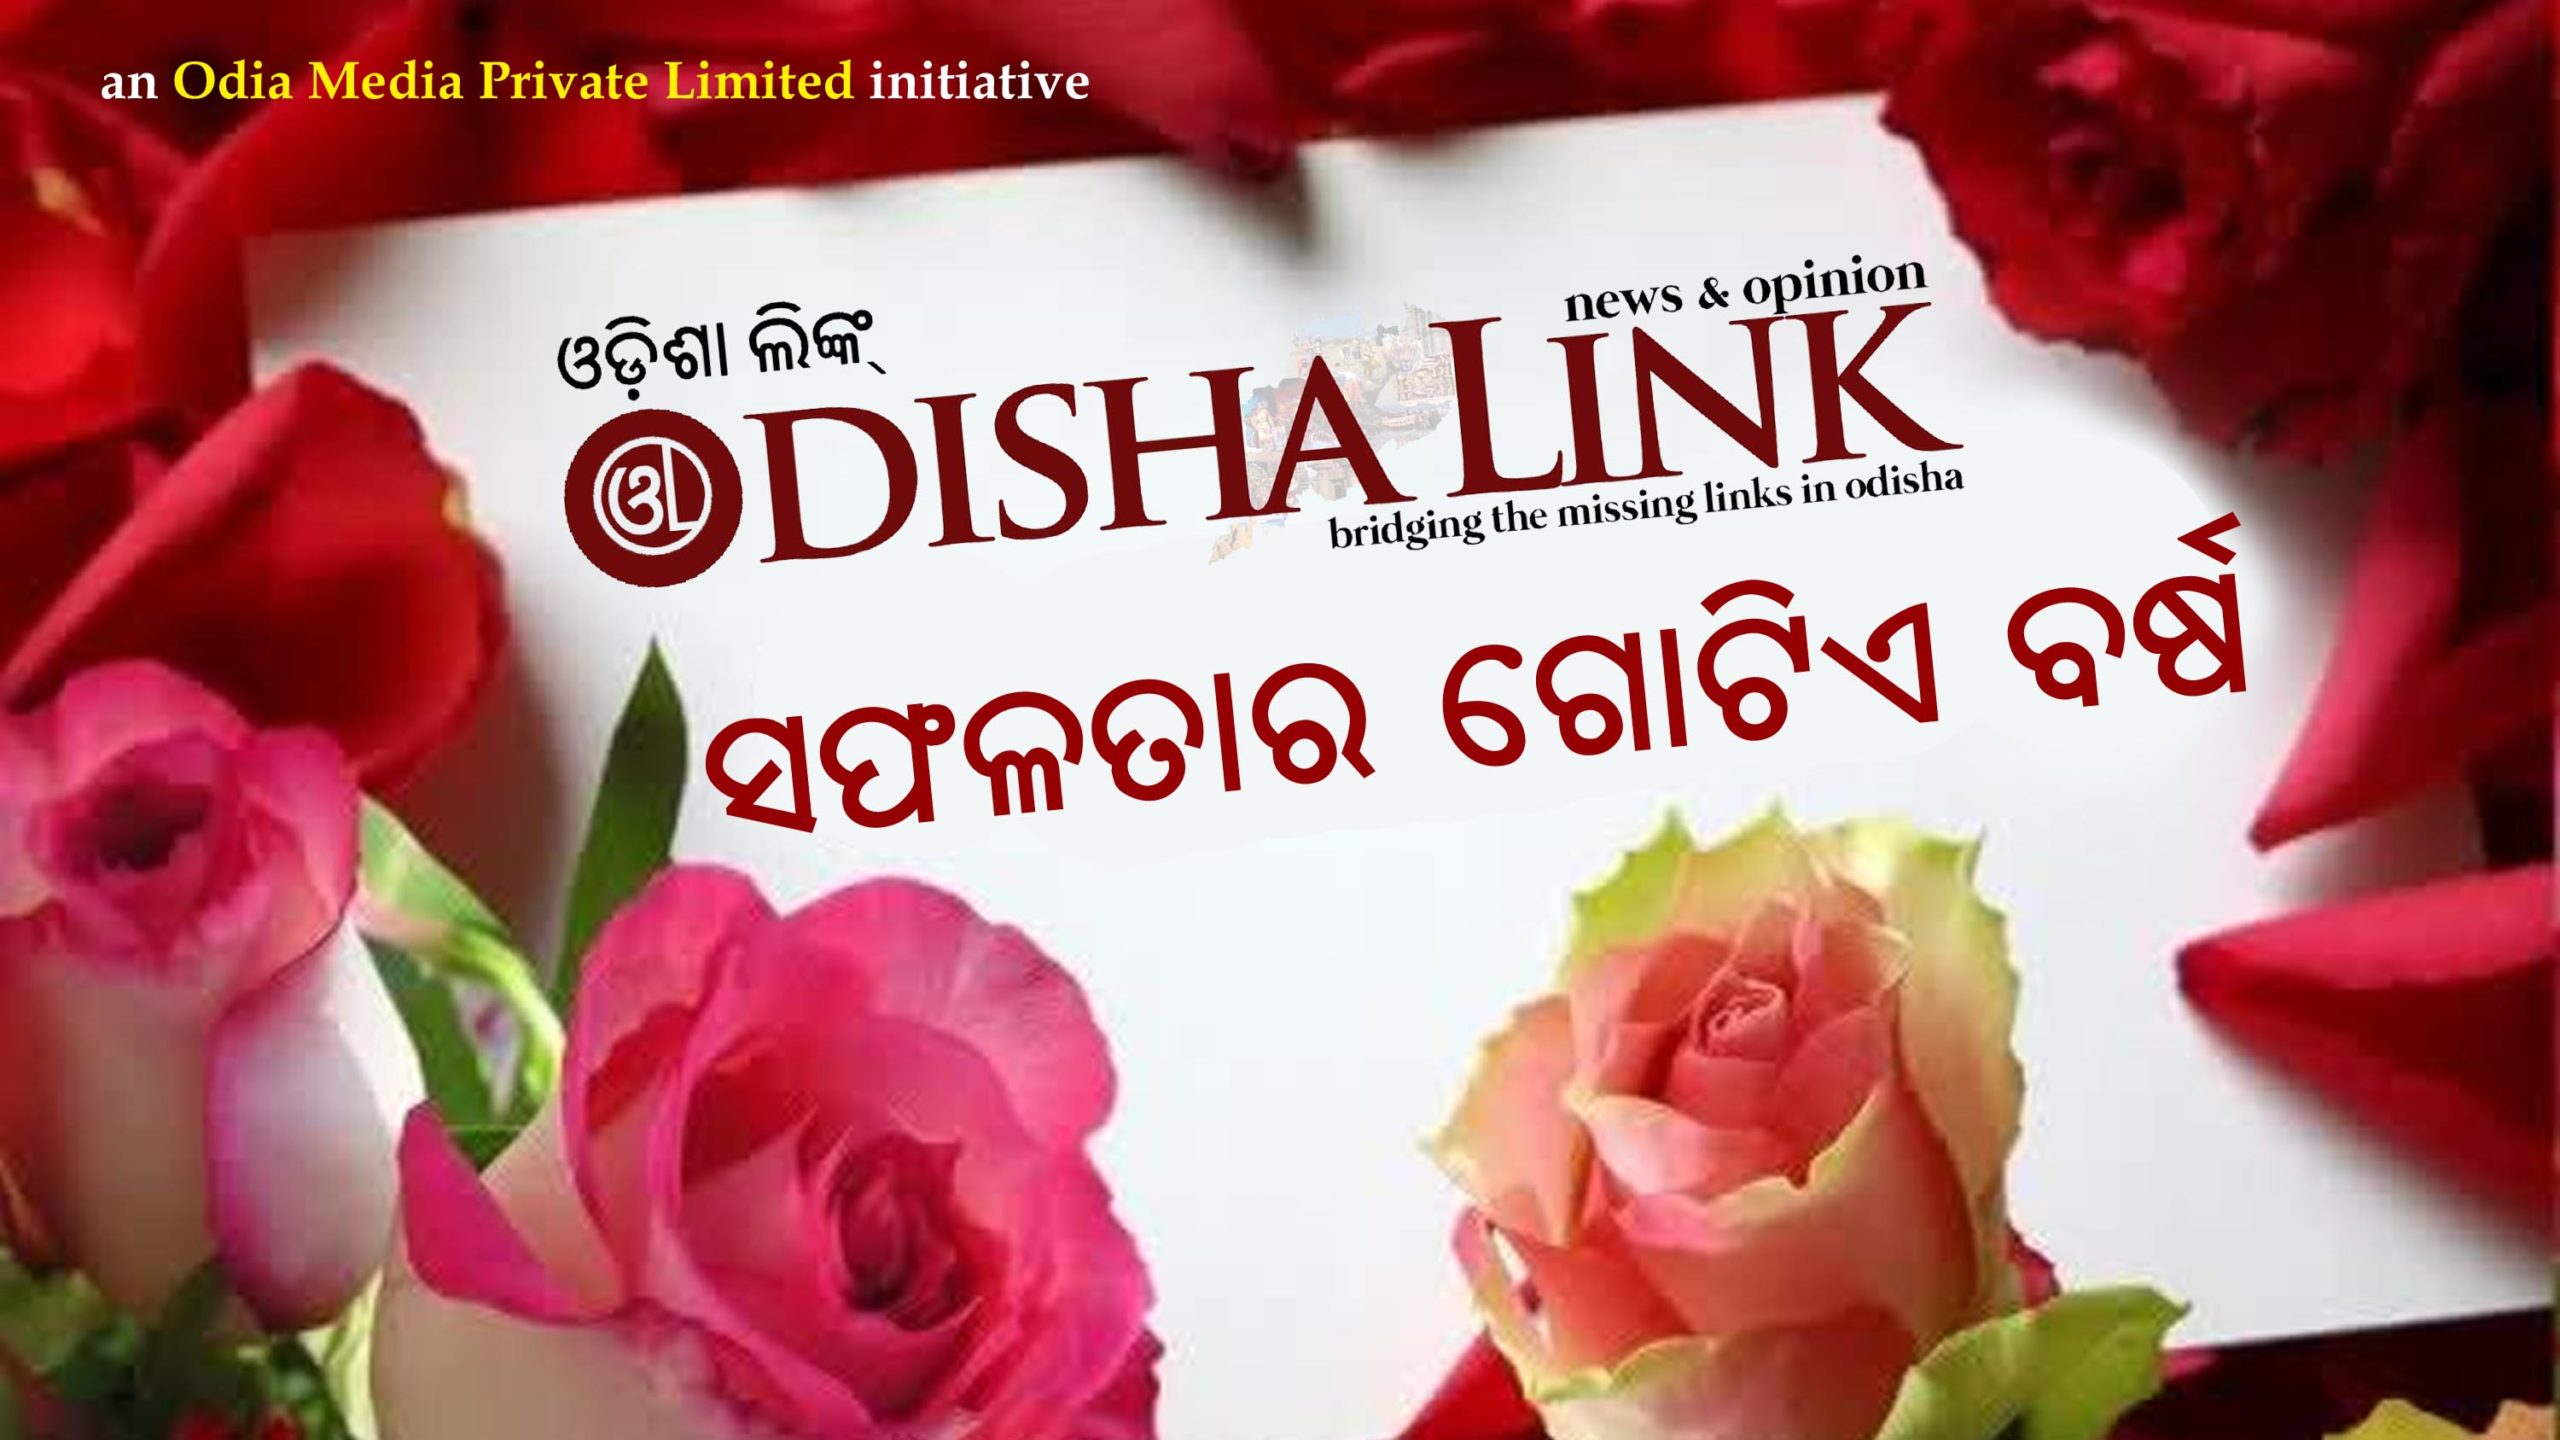 Odisha Link completes One year scaled